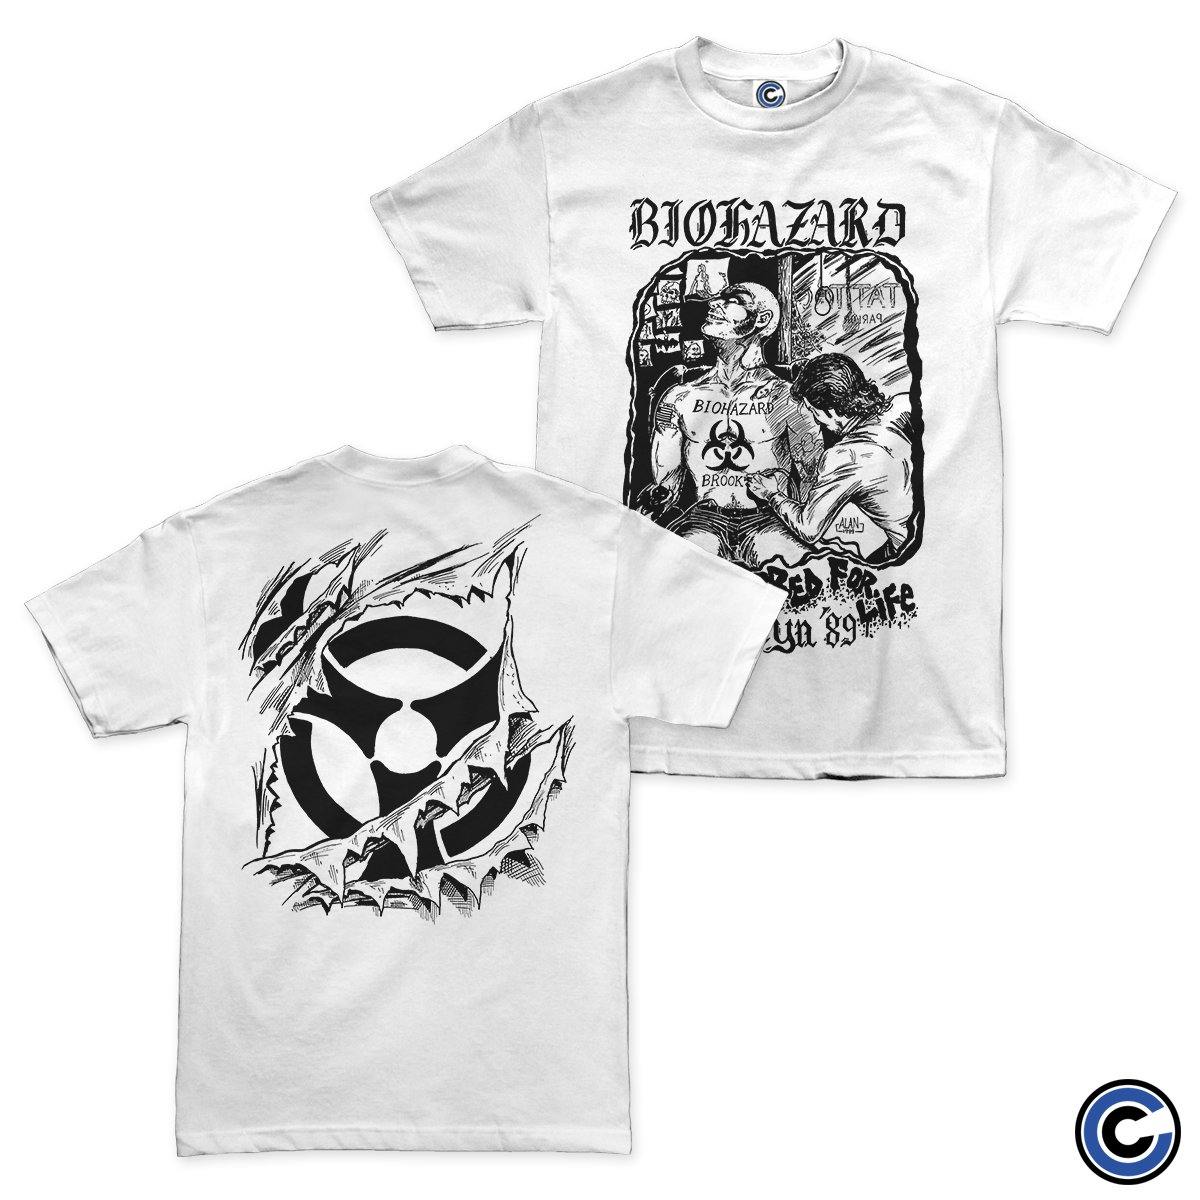 Buy – Biohazard "Scarred For Life" Shirt – Band & Music Merch – Cold Cuts Merch